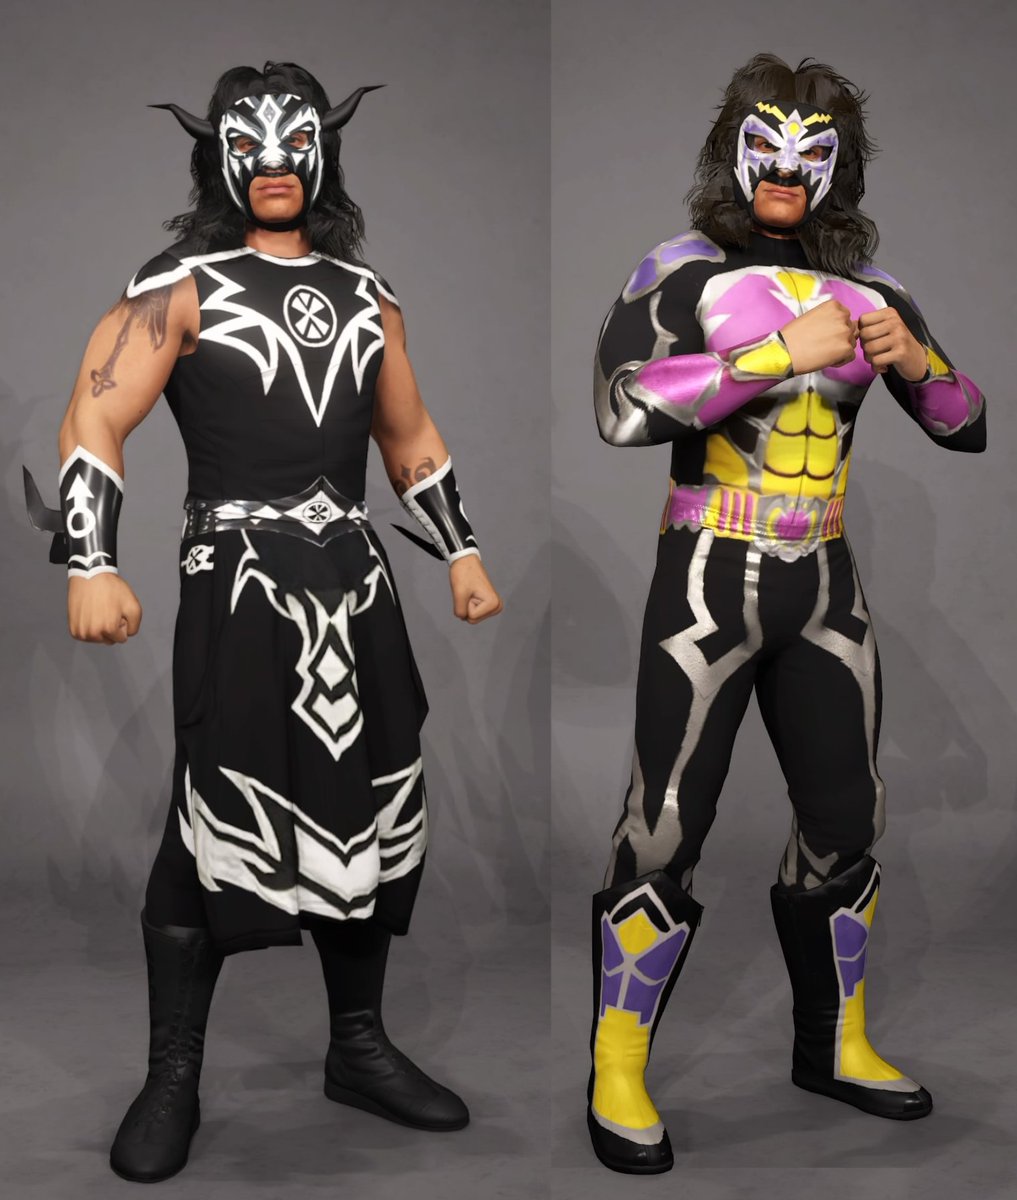 First upload for #WWE2K23 is up, of @PsicosisOficial. Had to go with a different hairstyle this year, because the hair I wanted to use doesn't work with this mask anymore. Tags are travisa, psychosis. Credit to @Spinebuster_94 for bulk of moveset